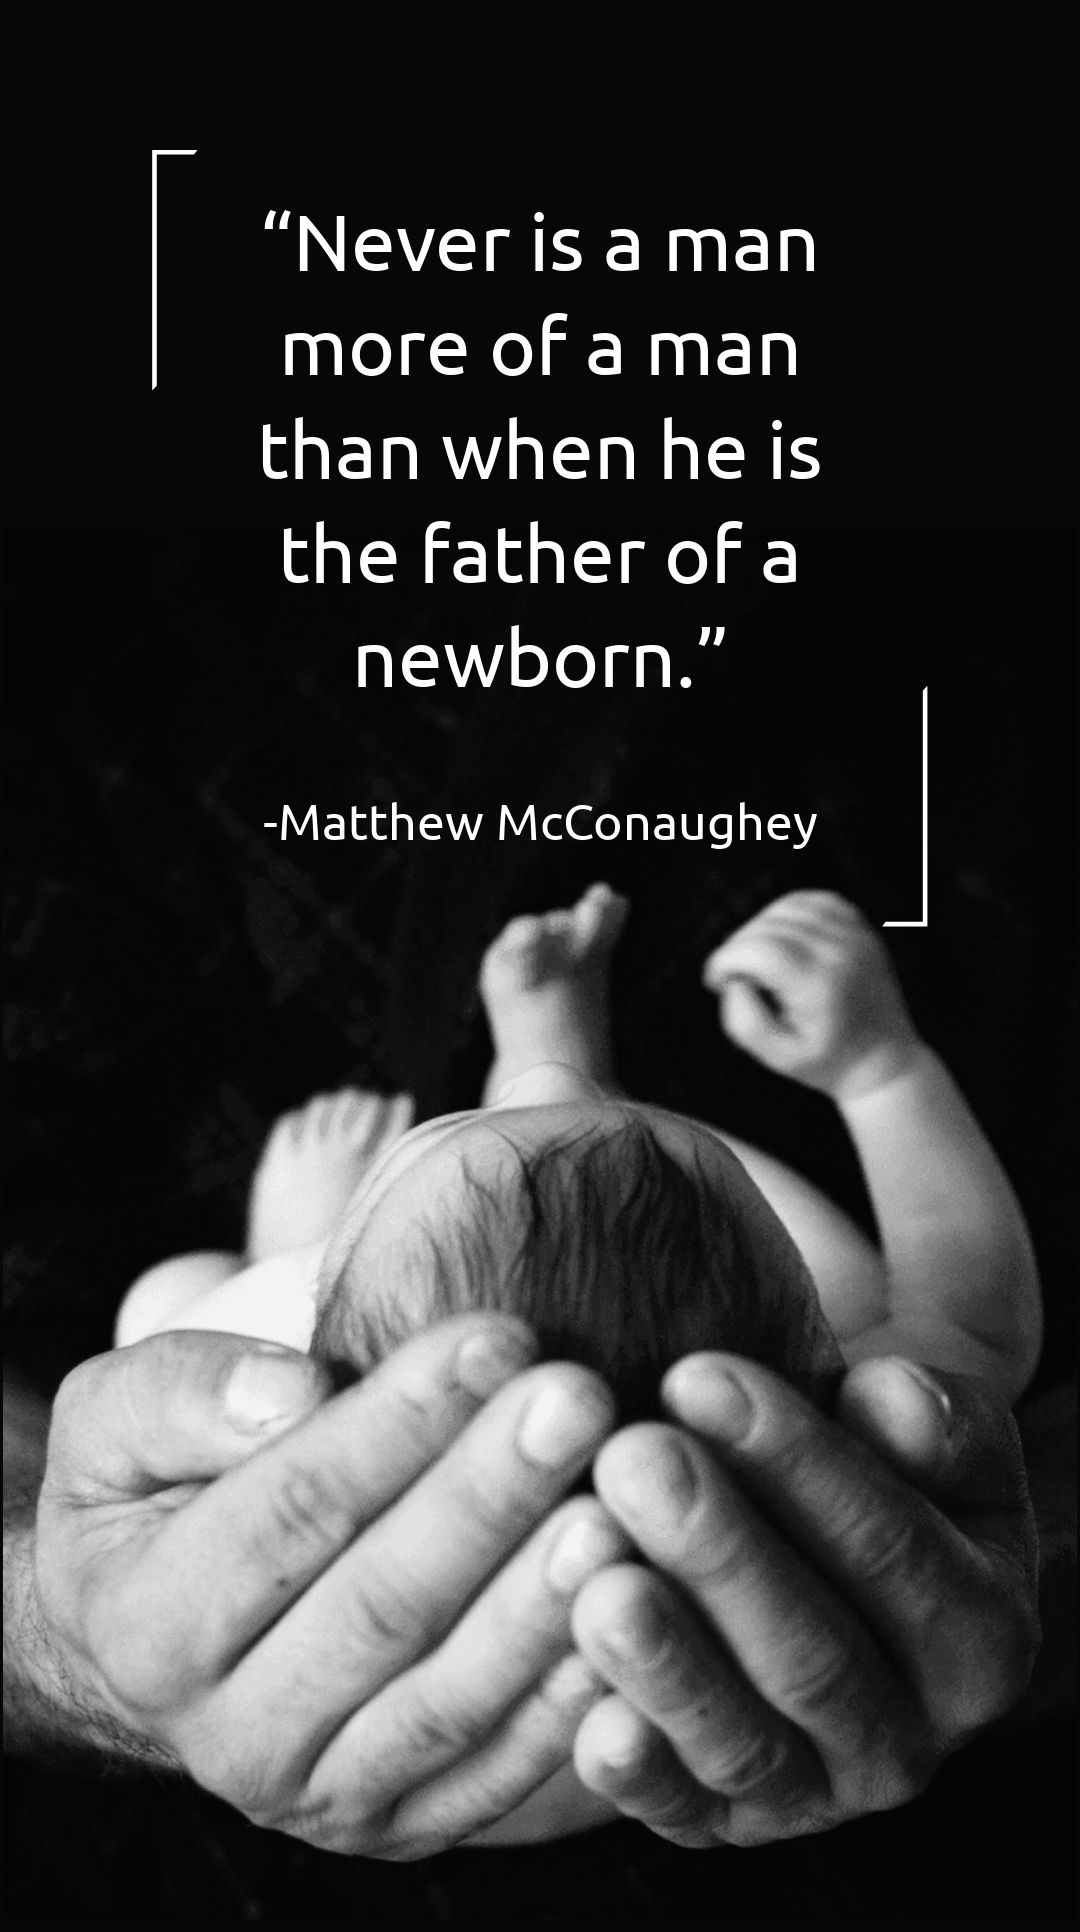 Matthew McConaughey - Never is a man more of a man than when he is the father of a newborn.